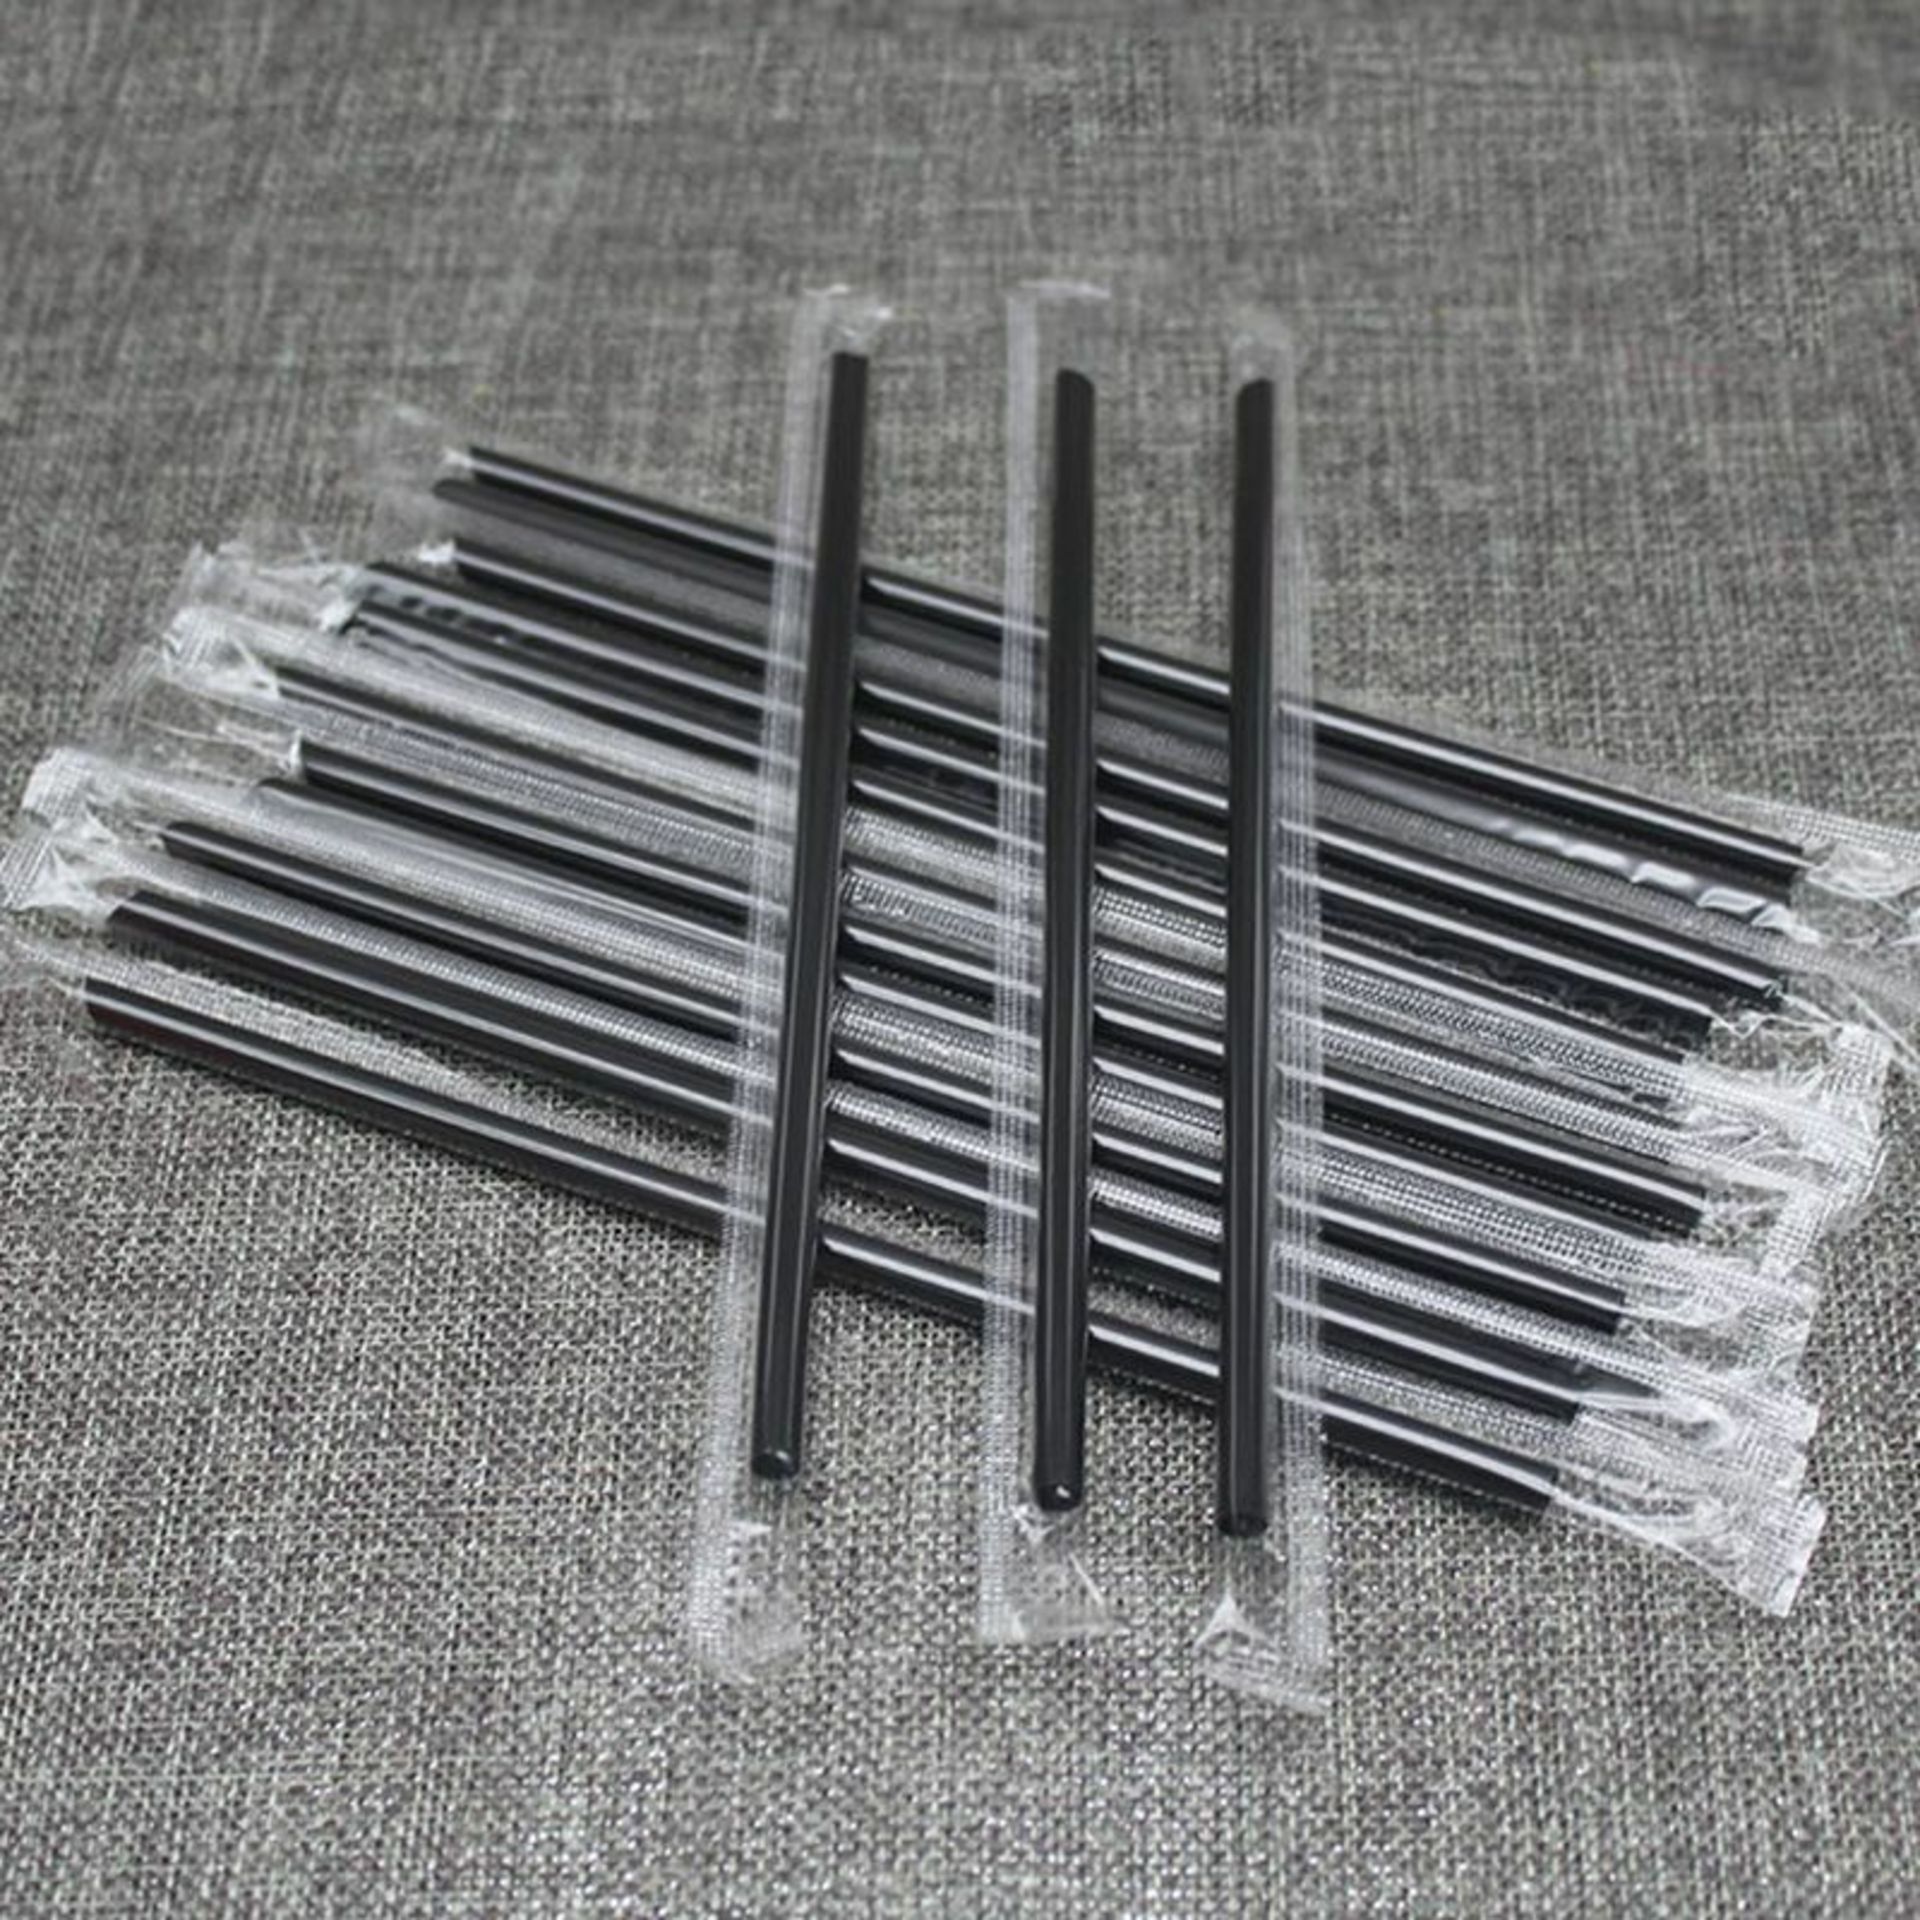 20,000 x NEW SEALED BLACK INDIVIDUALY WRAPPED DRINKING STRAWS IN 2 BOXES (ROW16)